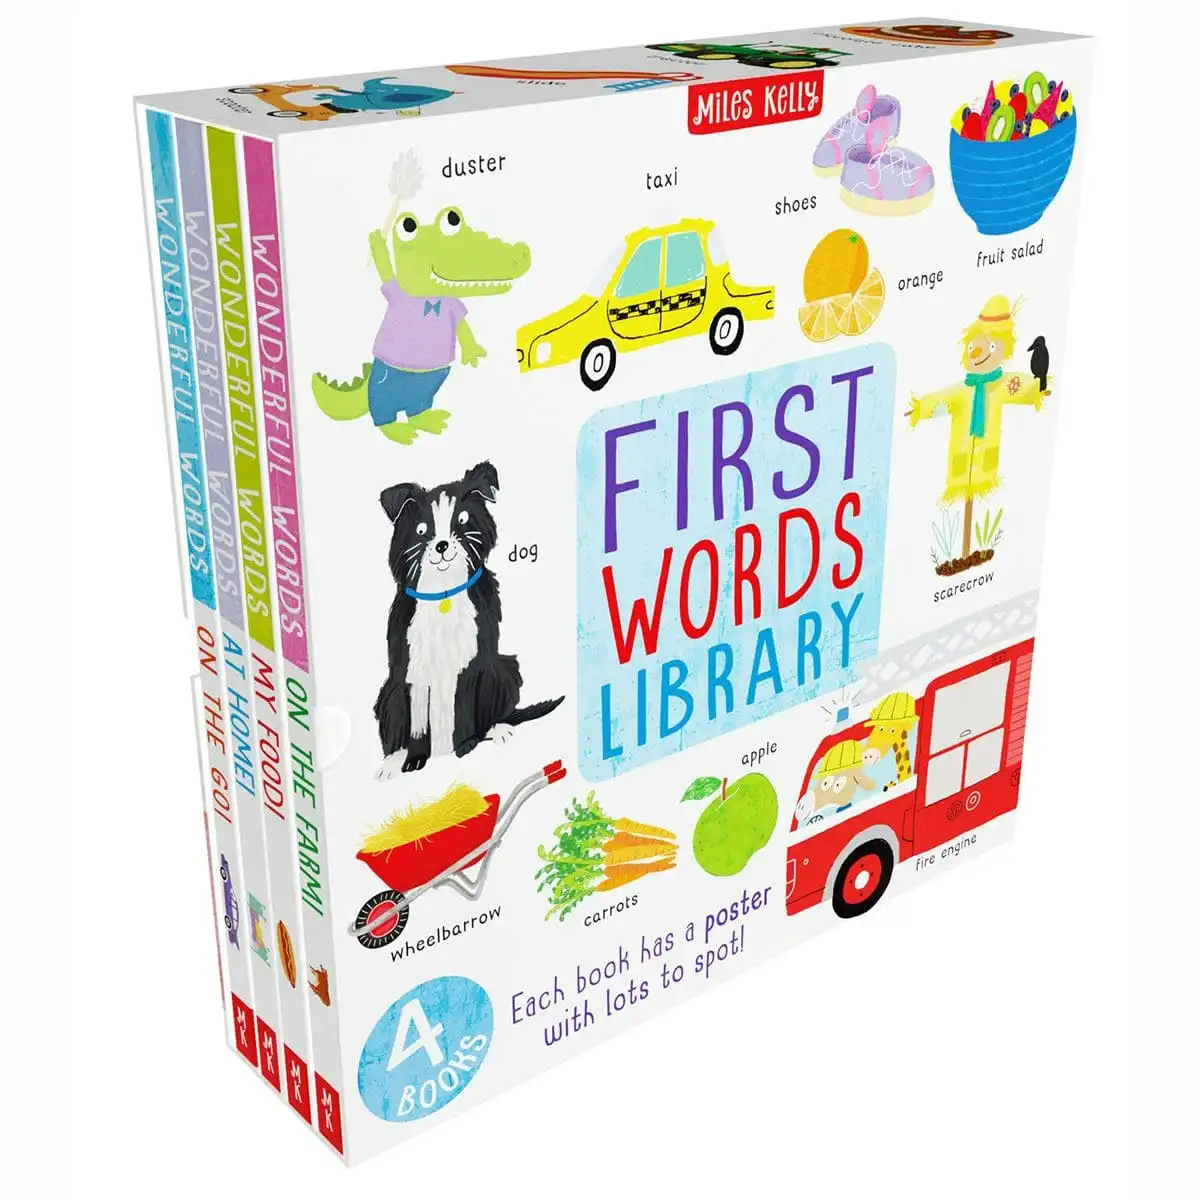 First Words Library - 4 Copy Box Set